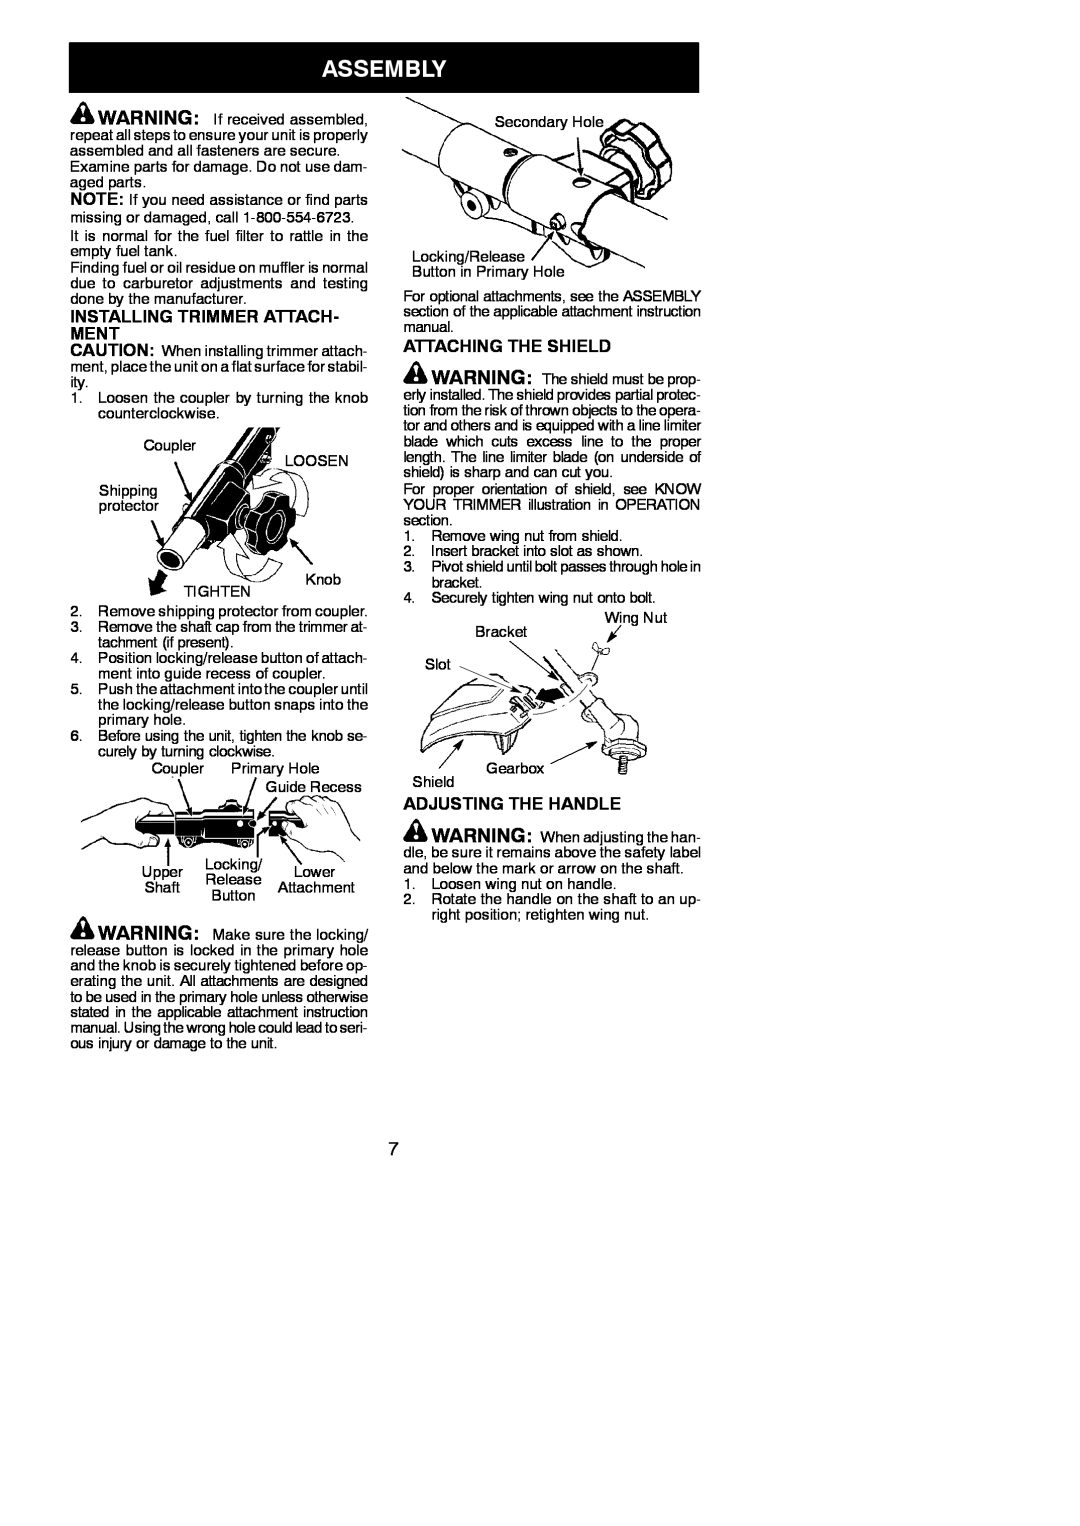 Poulan 545123431 instruction manual Assembly, Installing Trimmer Attach- Ment, Attaching The Shield, Adjusting The Handle 